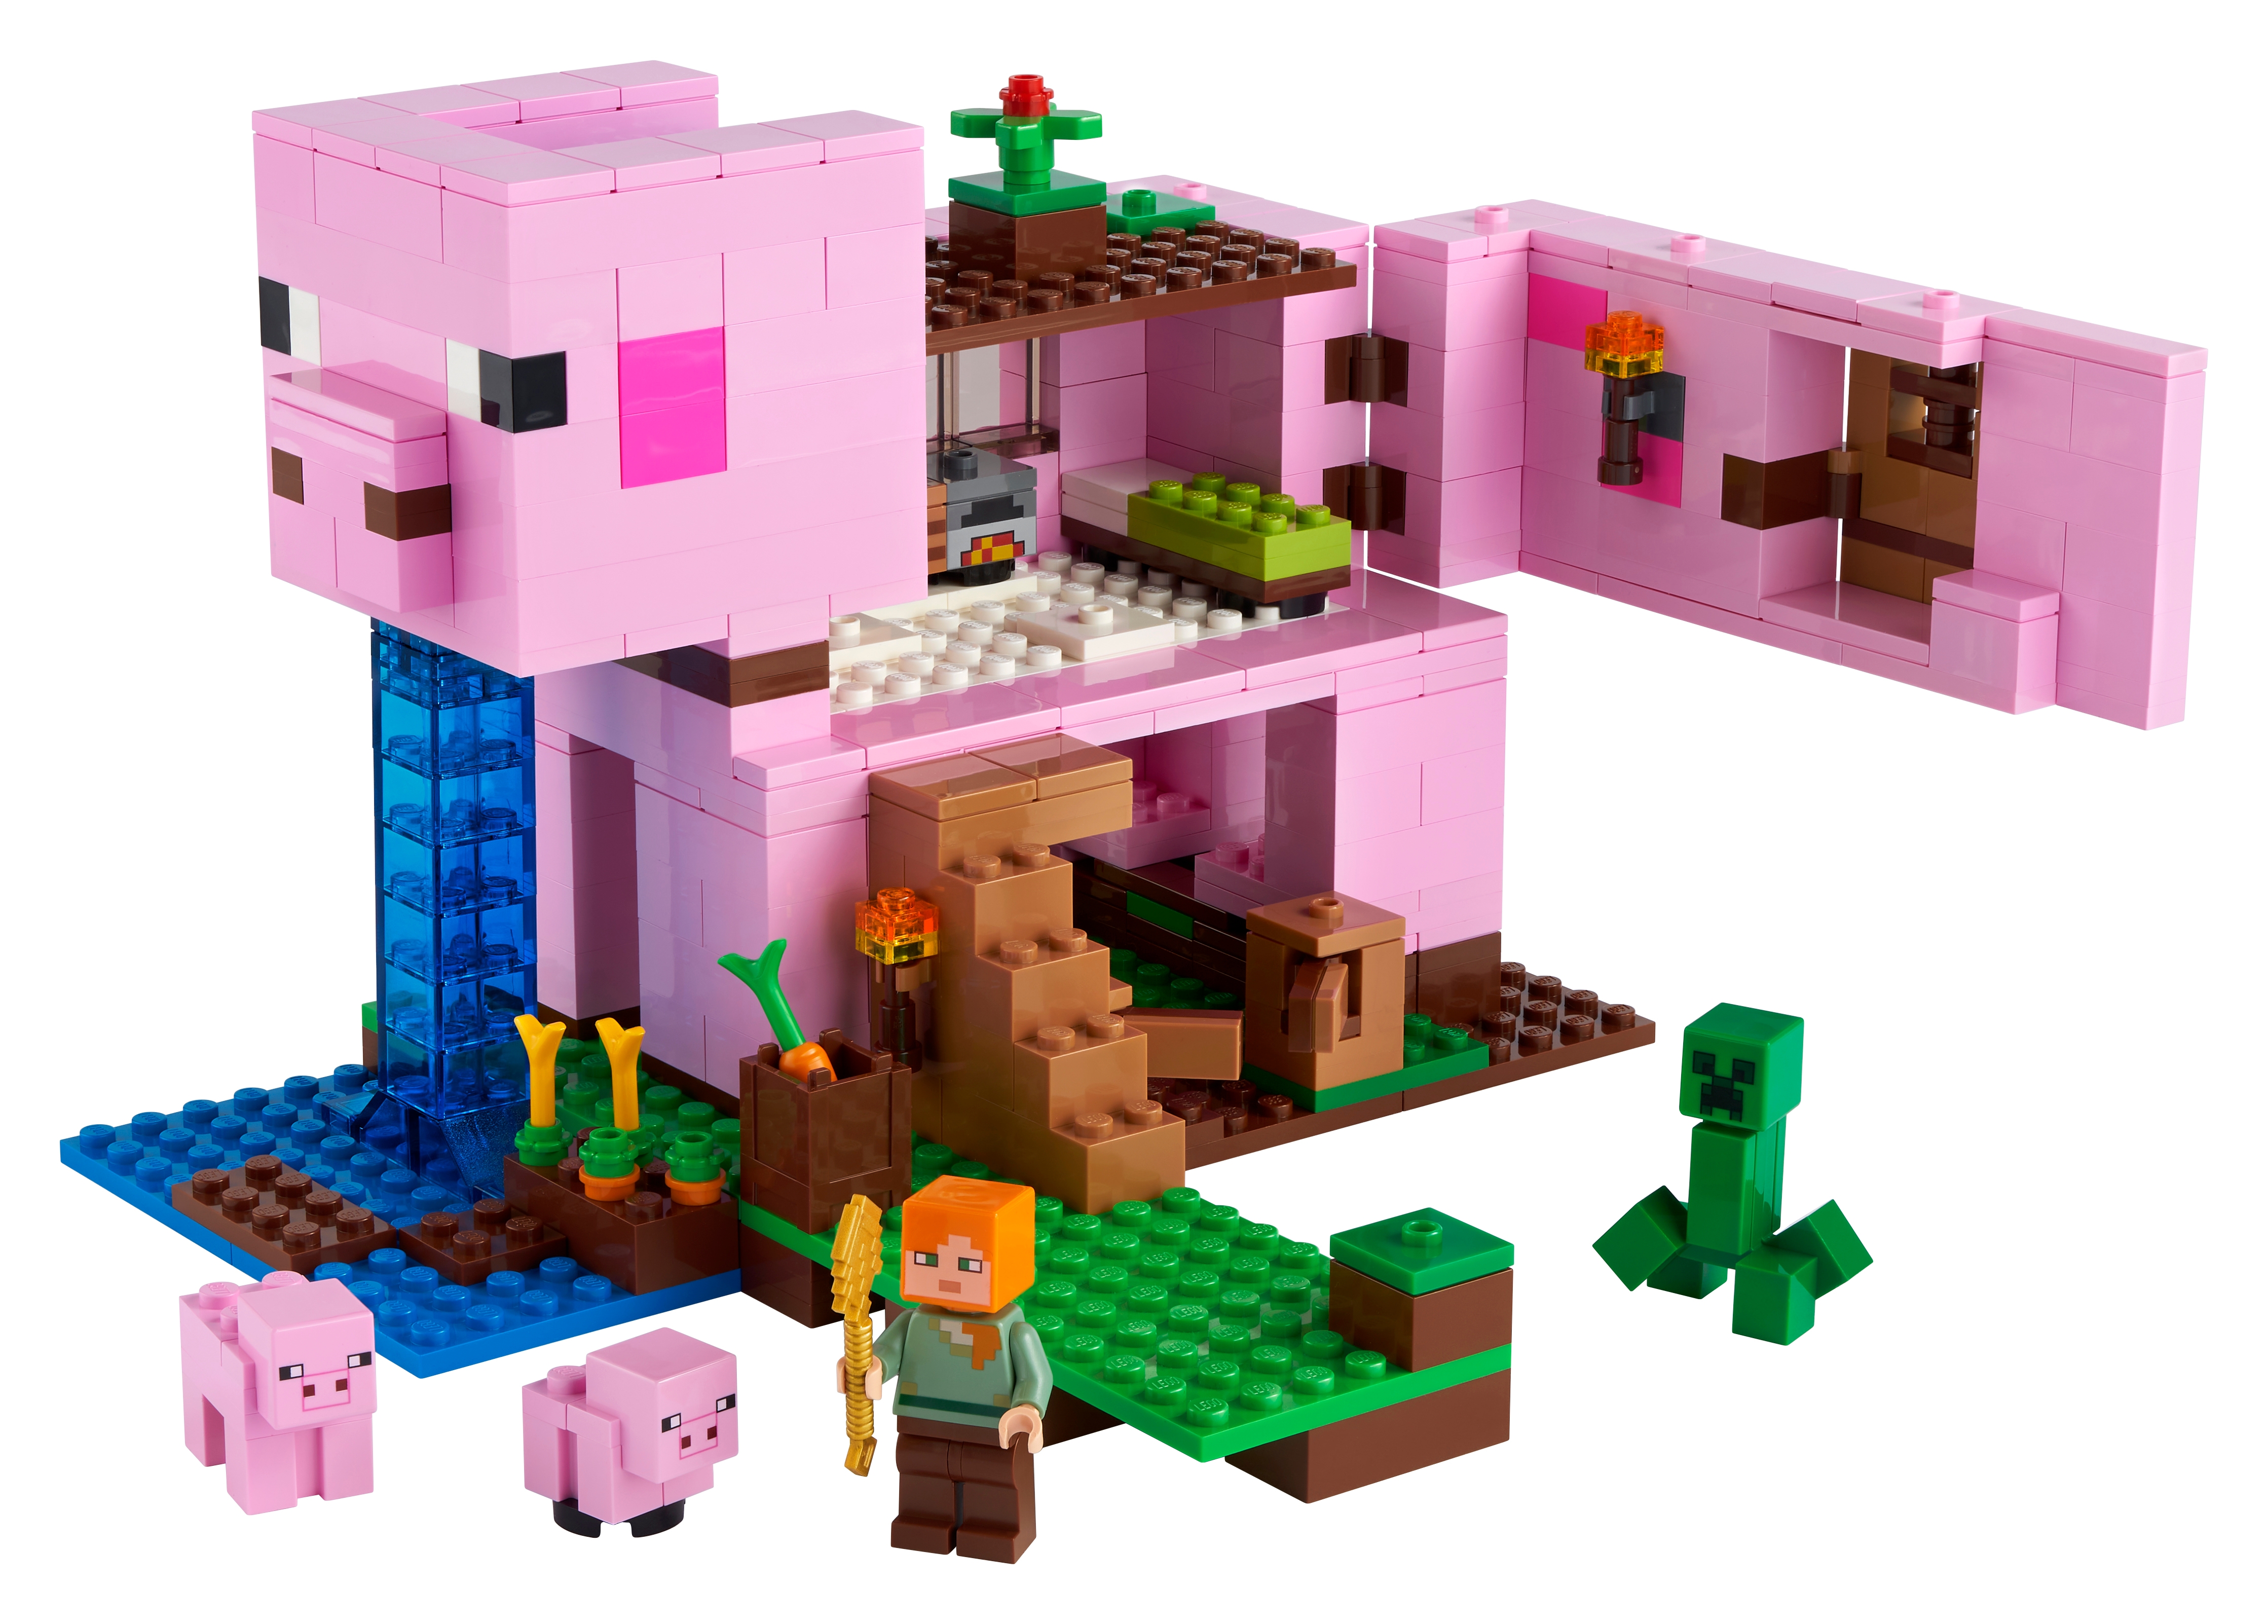 The Pig House 21170 Minecraft Buy Online At The Official Lego Shop Us